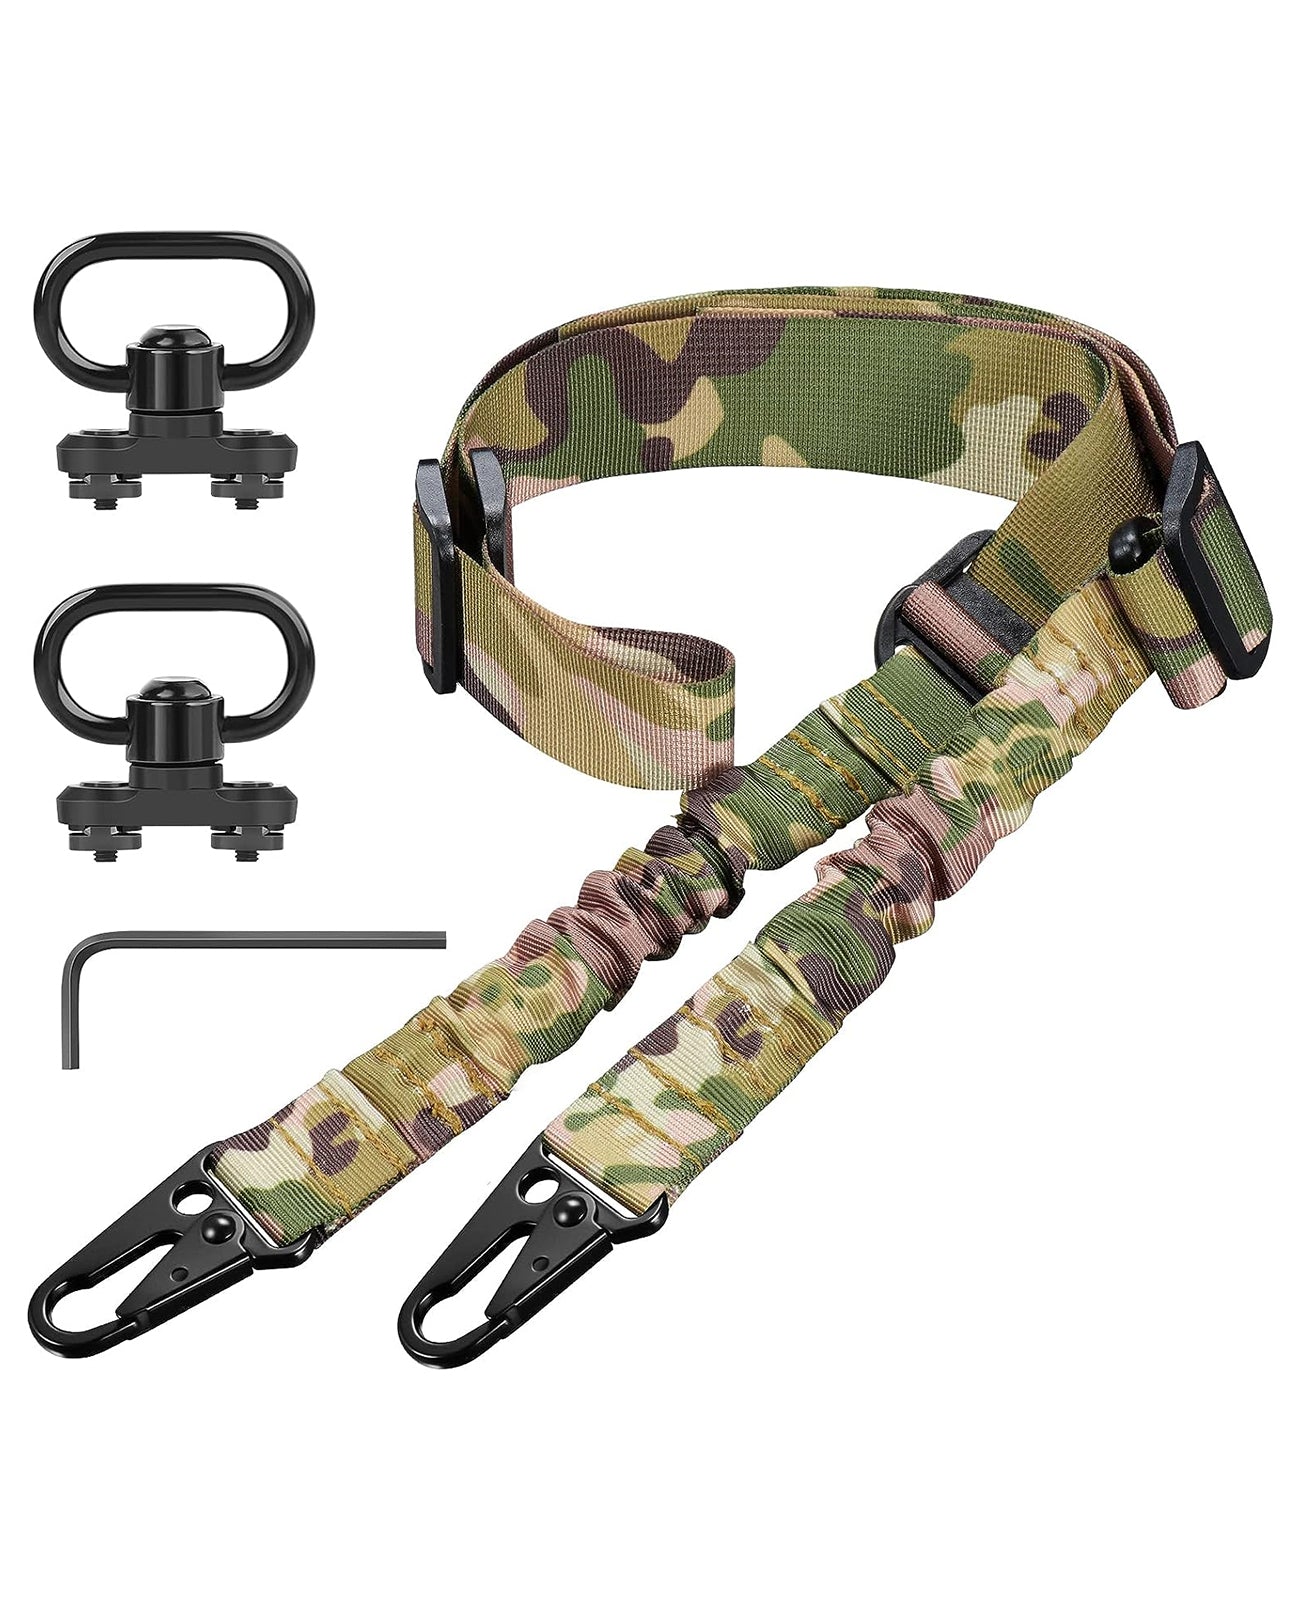 Camo 2 Point Rifle Sling with QD 360 Degree Rotation Sling Swivels